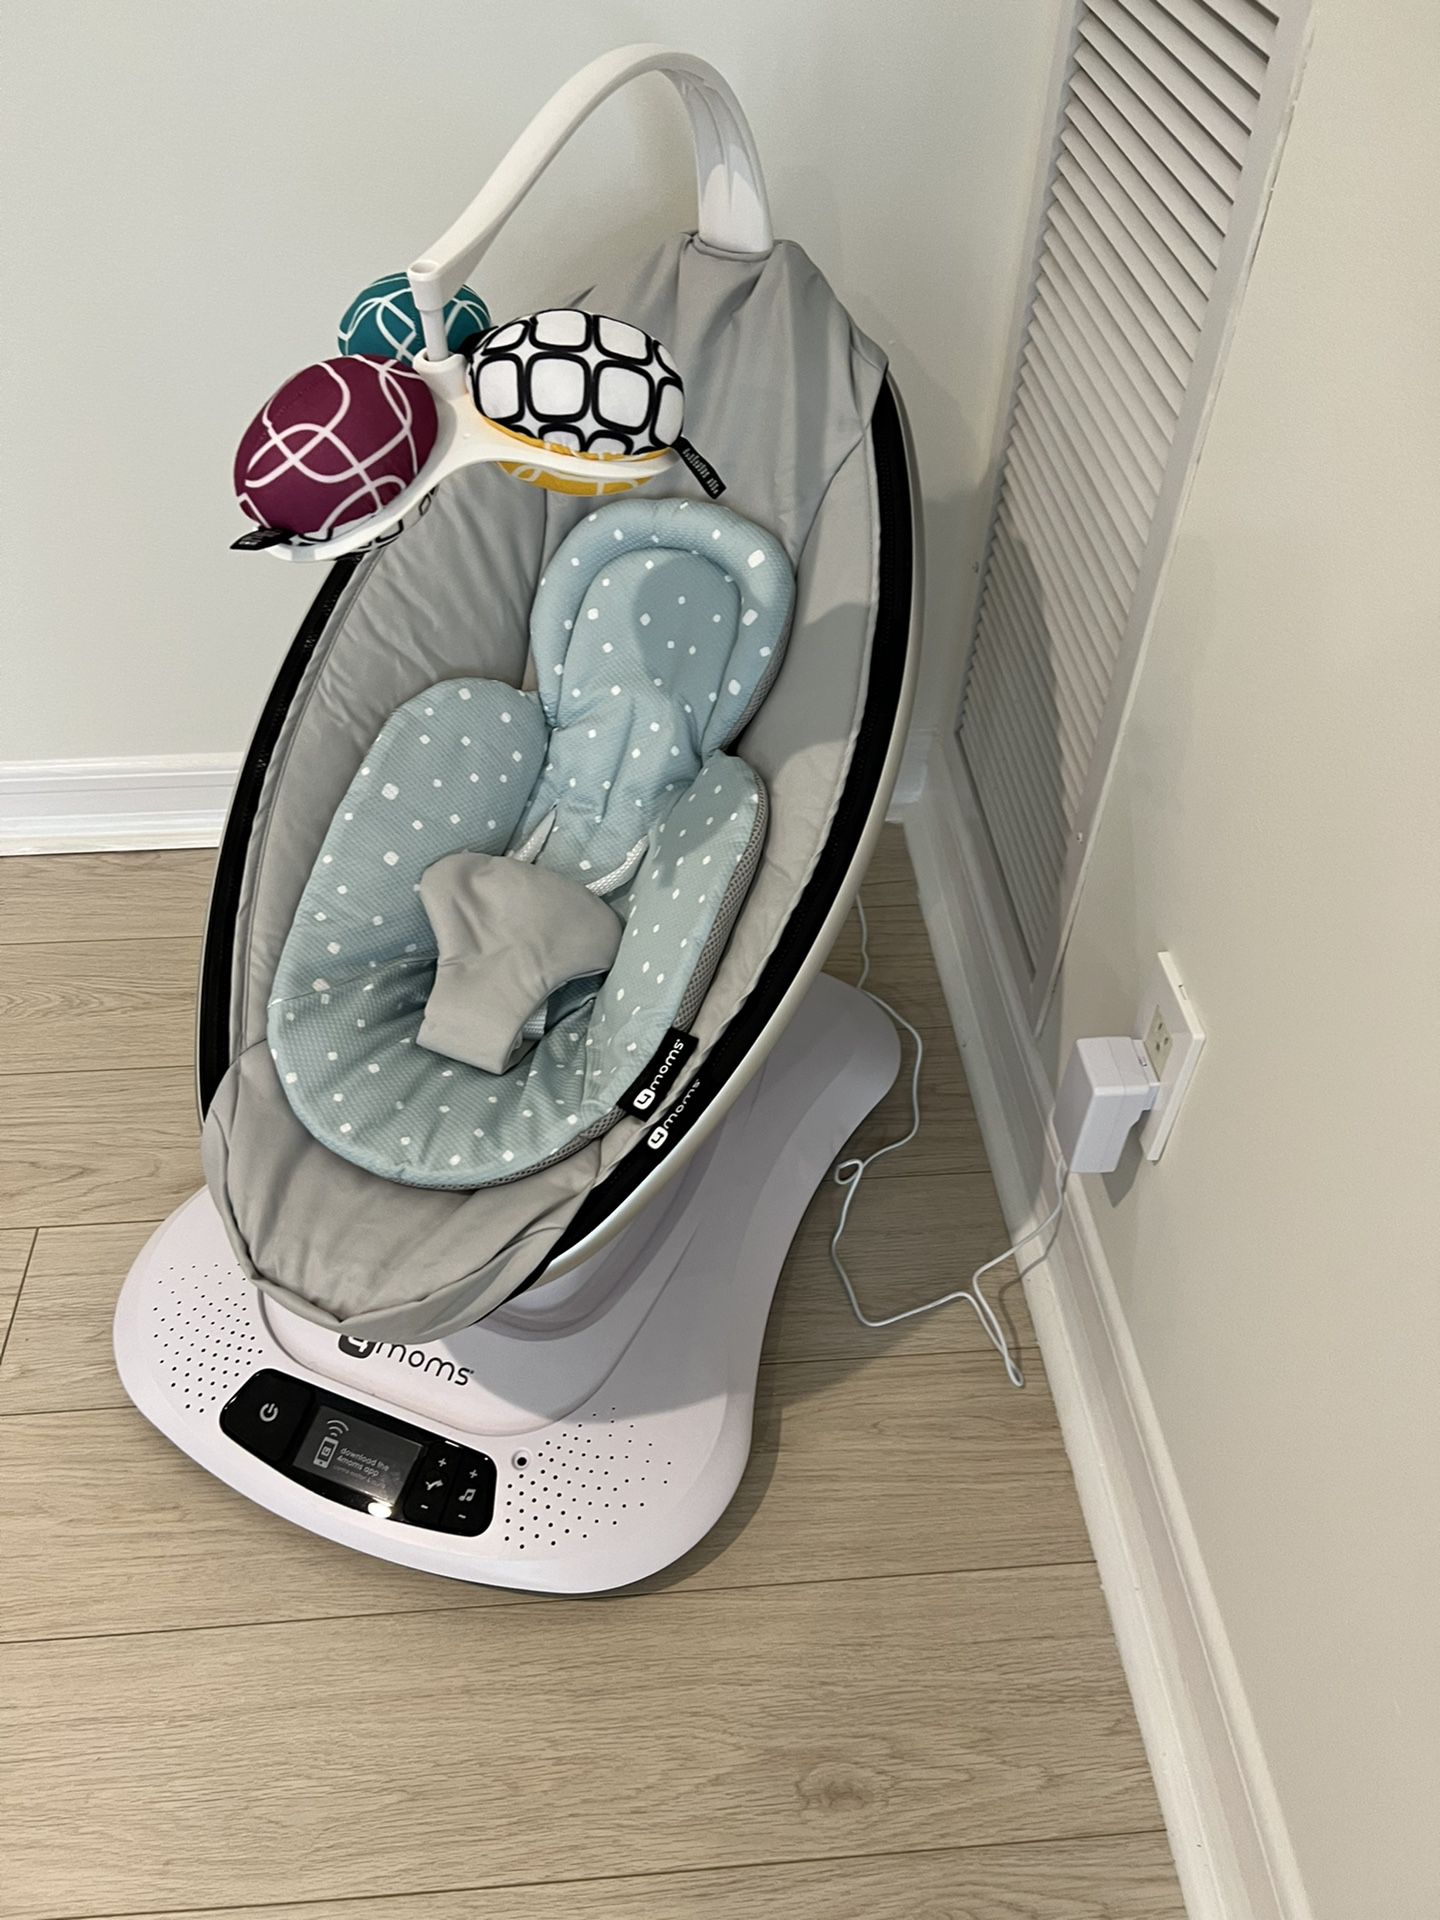 4 Moms Mamaroo Must Be Sold